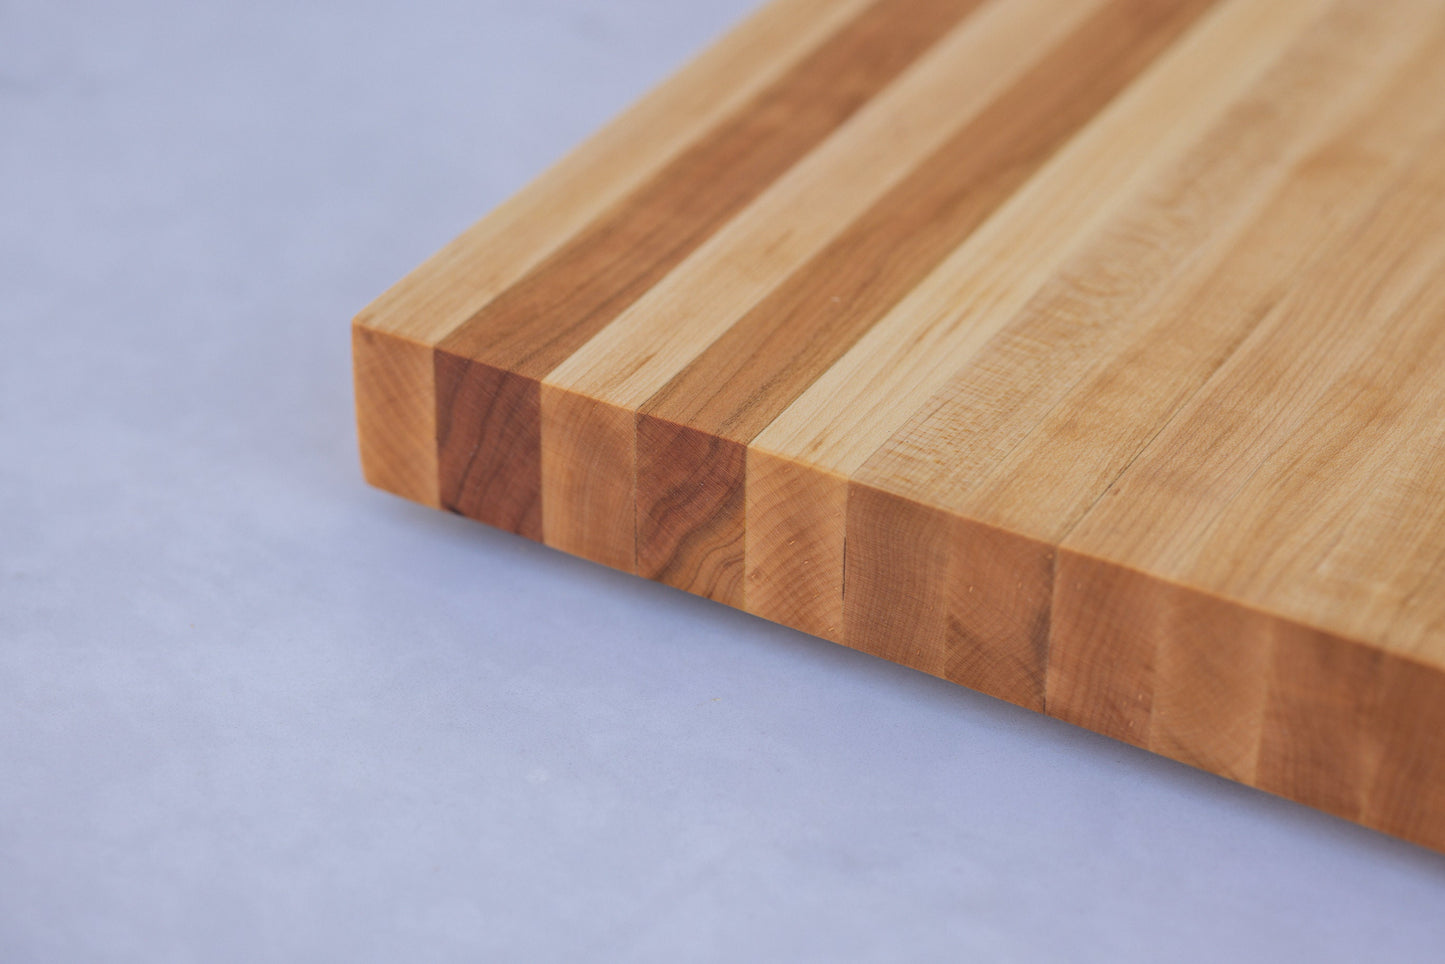 Experience the allure of our large hardwood cutting board. Expertly crafted from hard maple and hickory, this exquisite gift measures approximately 17"x10.5"x1.5". Combining beauty and functionality, it's the perfect present for culinary adventurers.